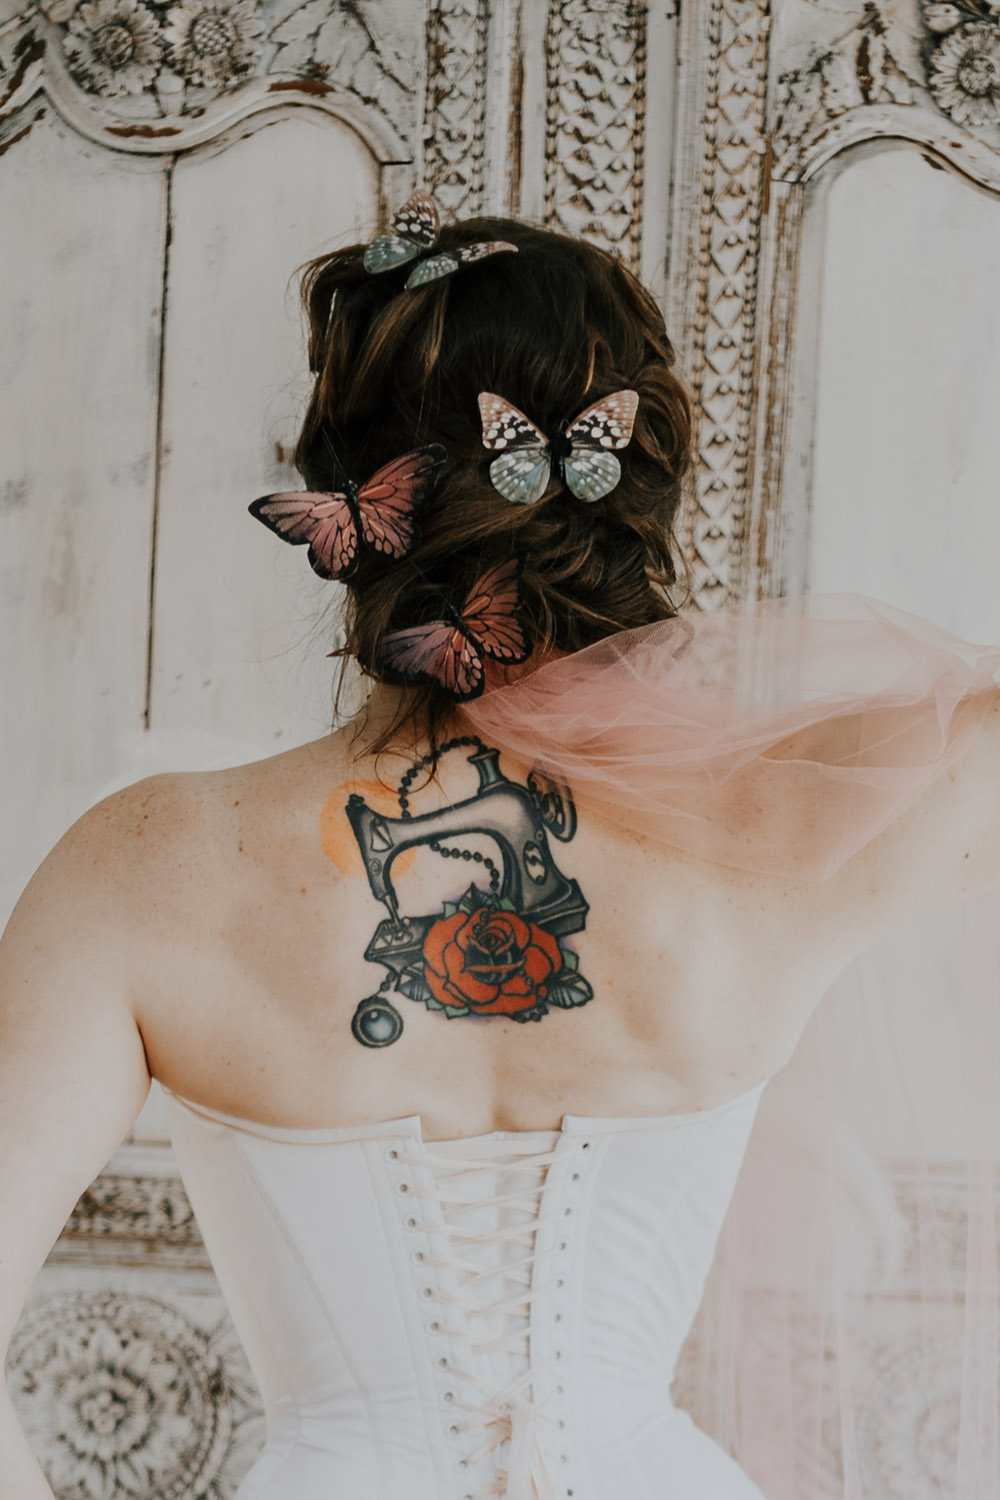 Back view of the bride's hair with butterflies